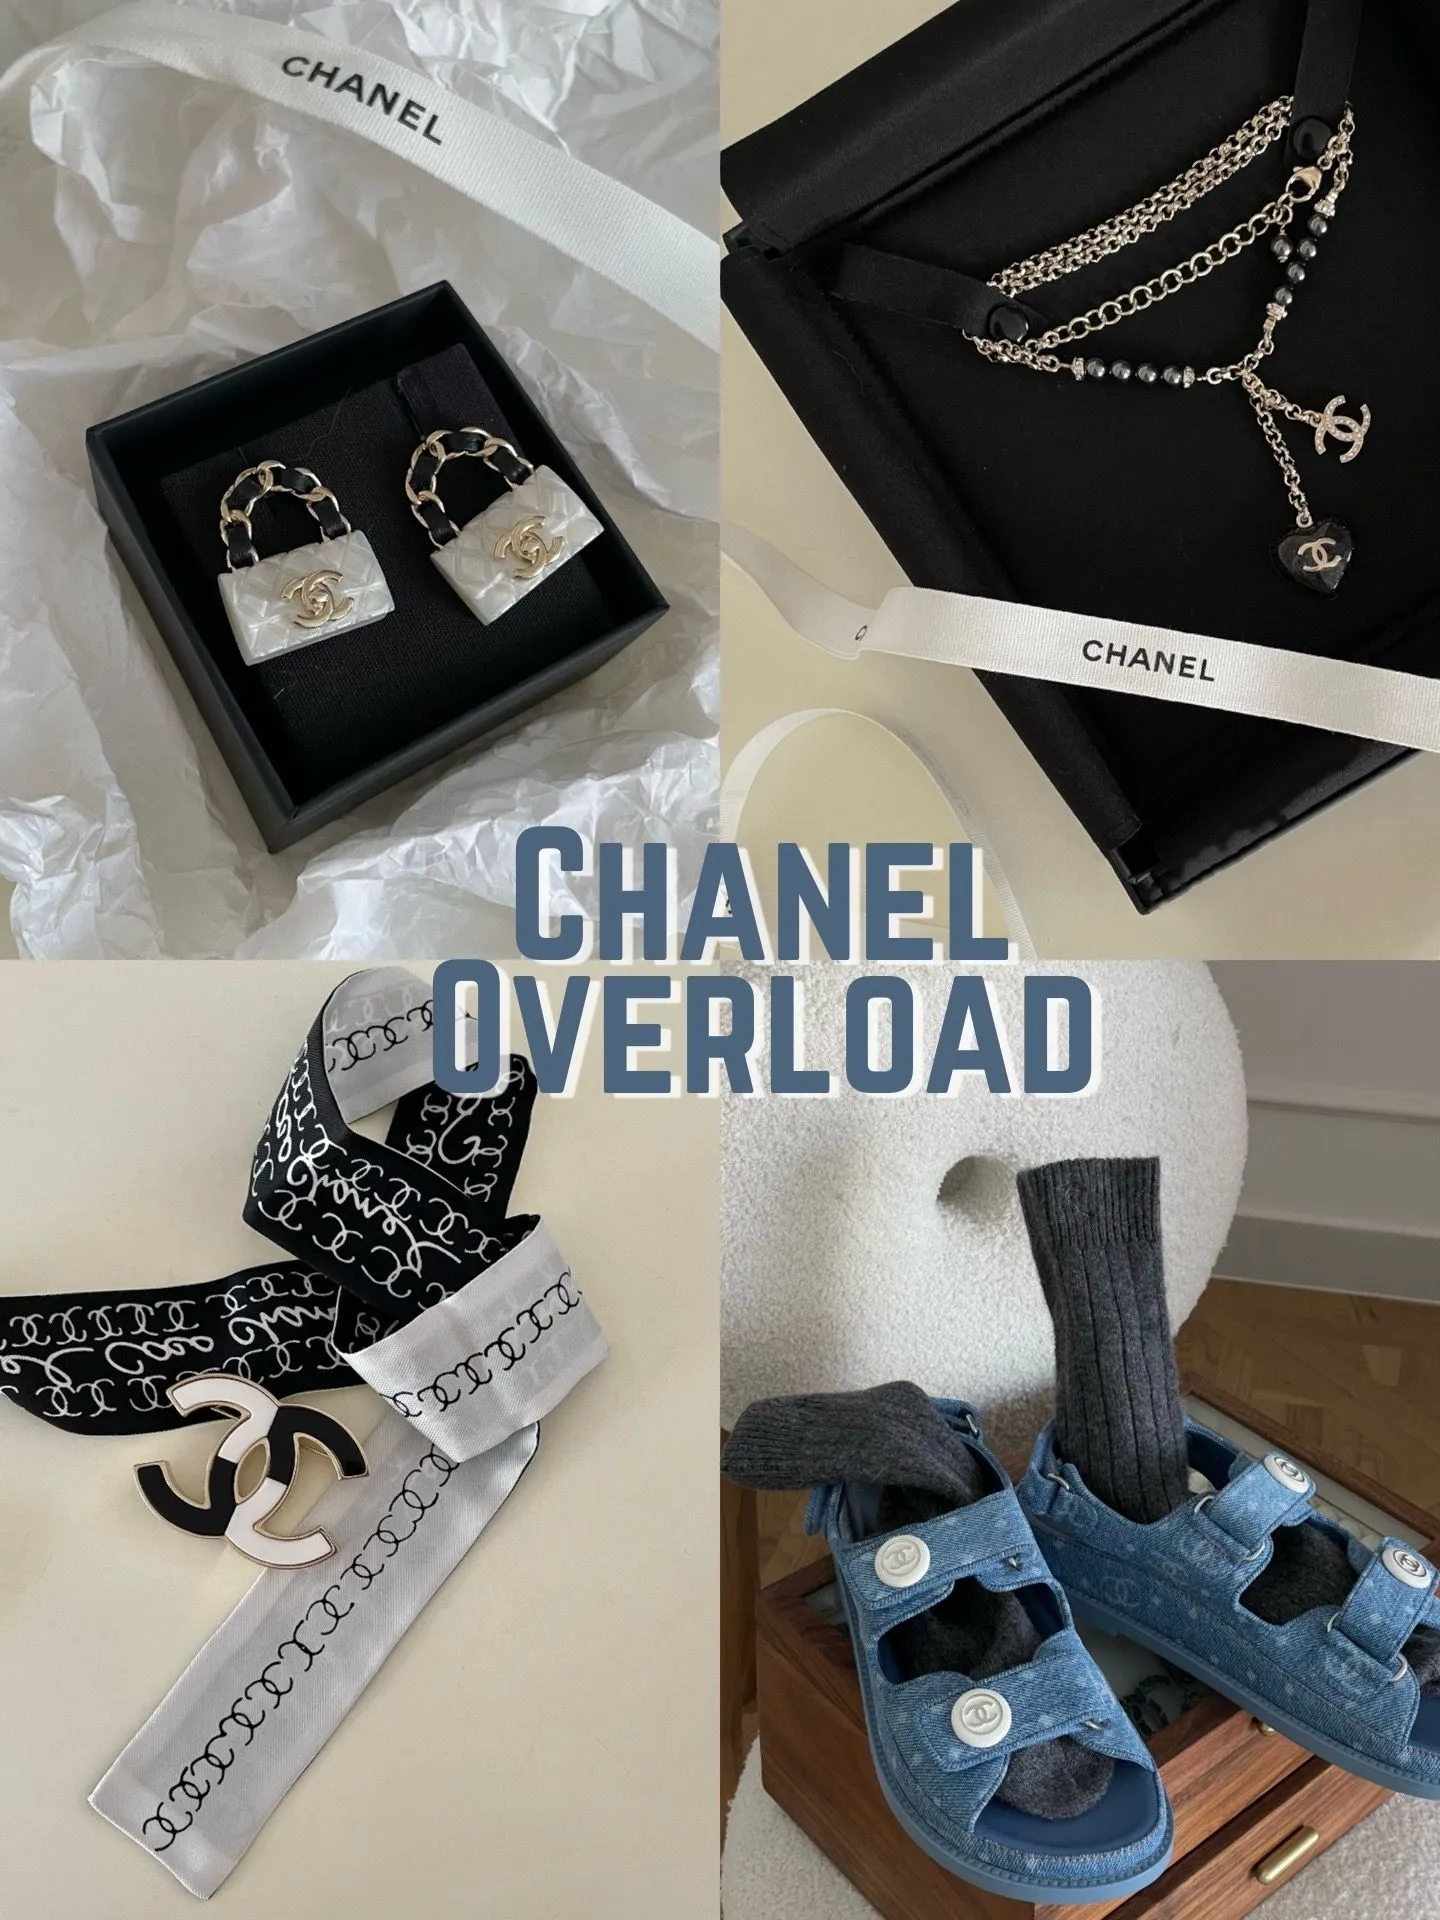 Chanel 23P's Amazing Collections 💯, Gallery posted by Claire Andrews